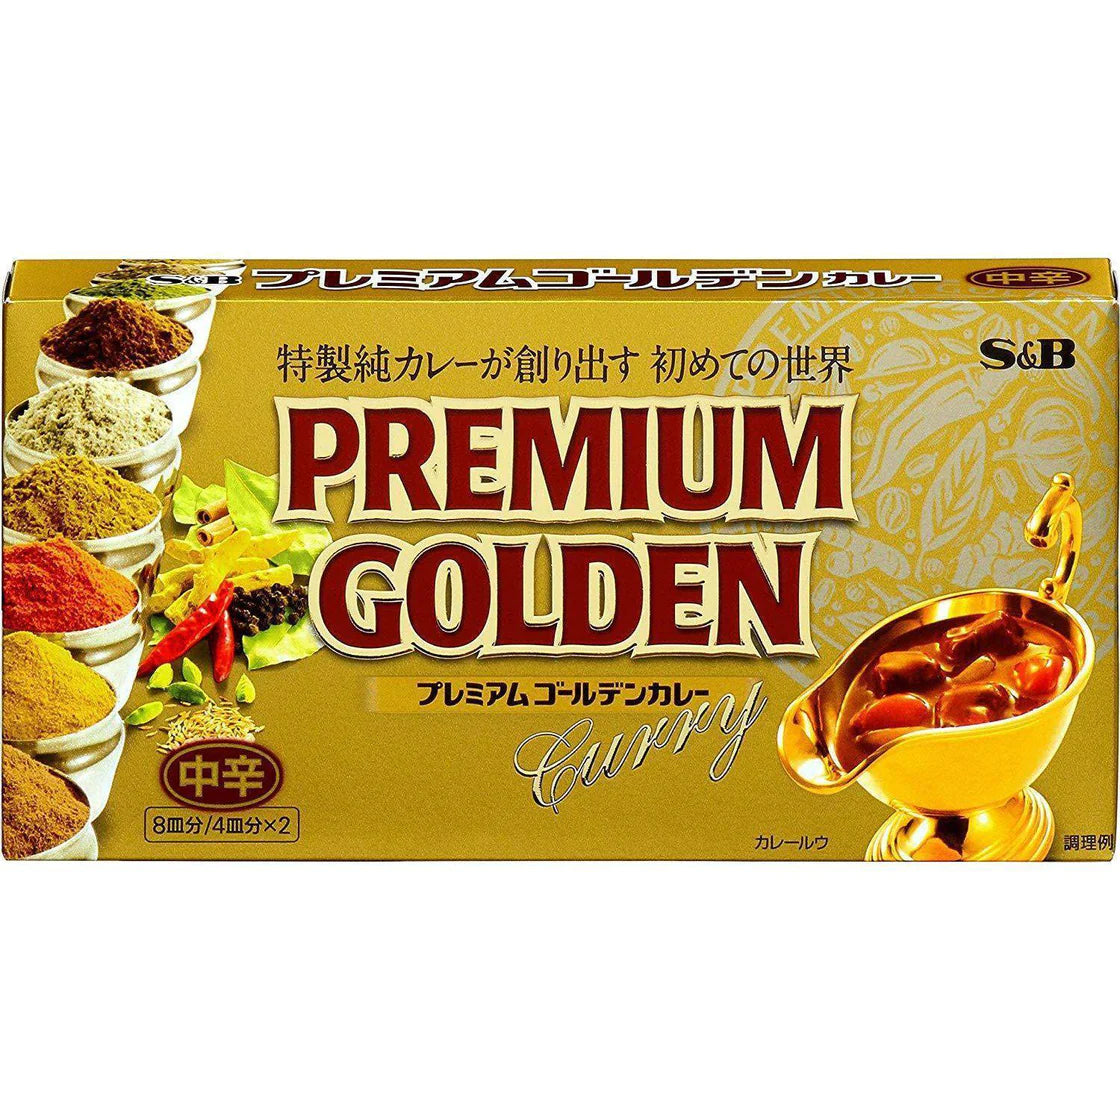 Japan Curry Choux